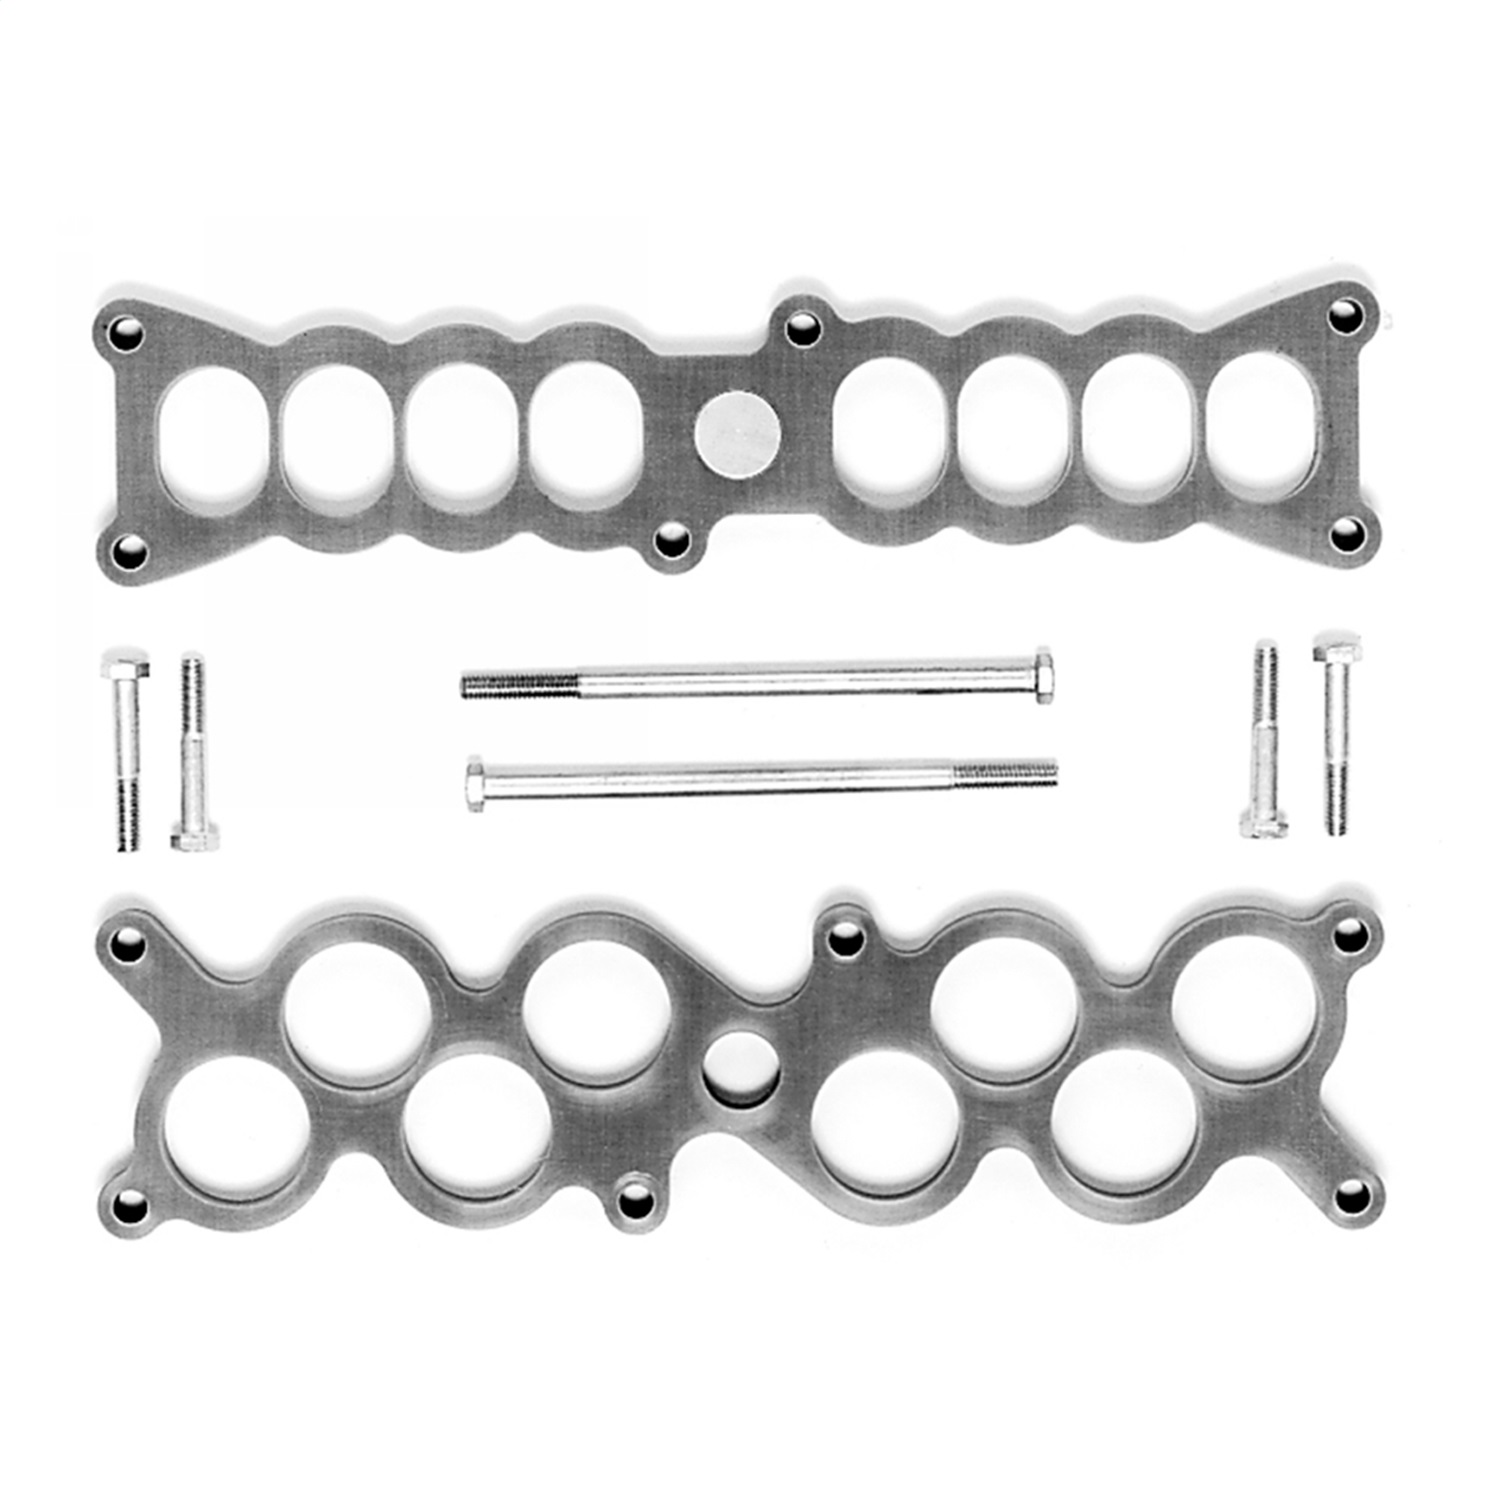 Ford Racing Ford Racing M-9486-A53 Cobra 1 in. EFI Intake Heat Spacer Fits 93-95 Mustang